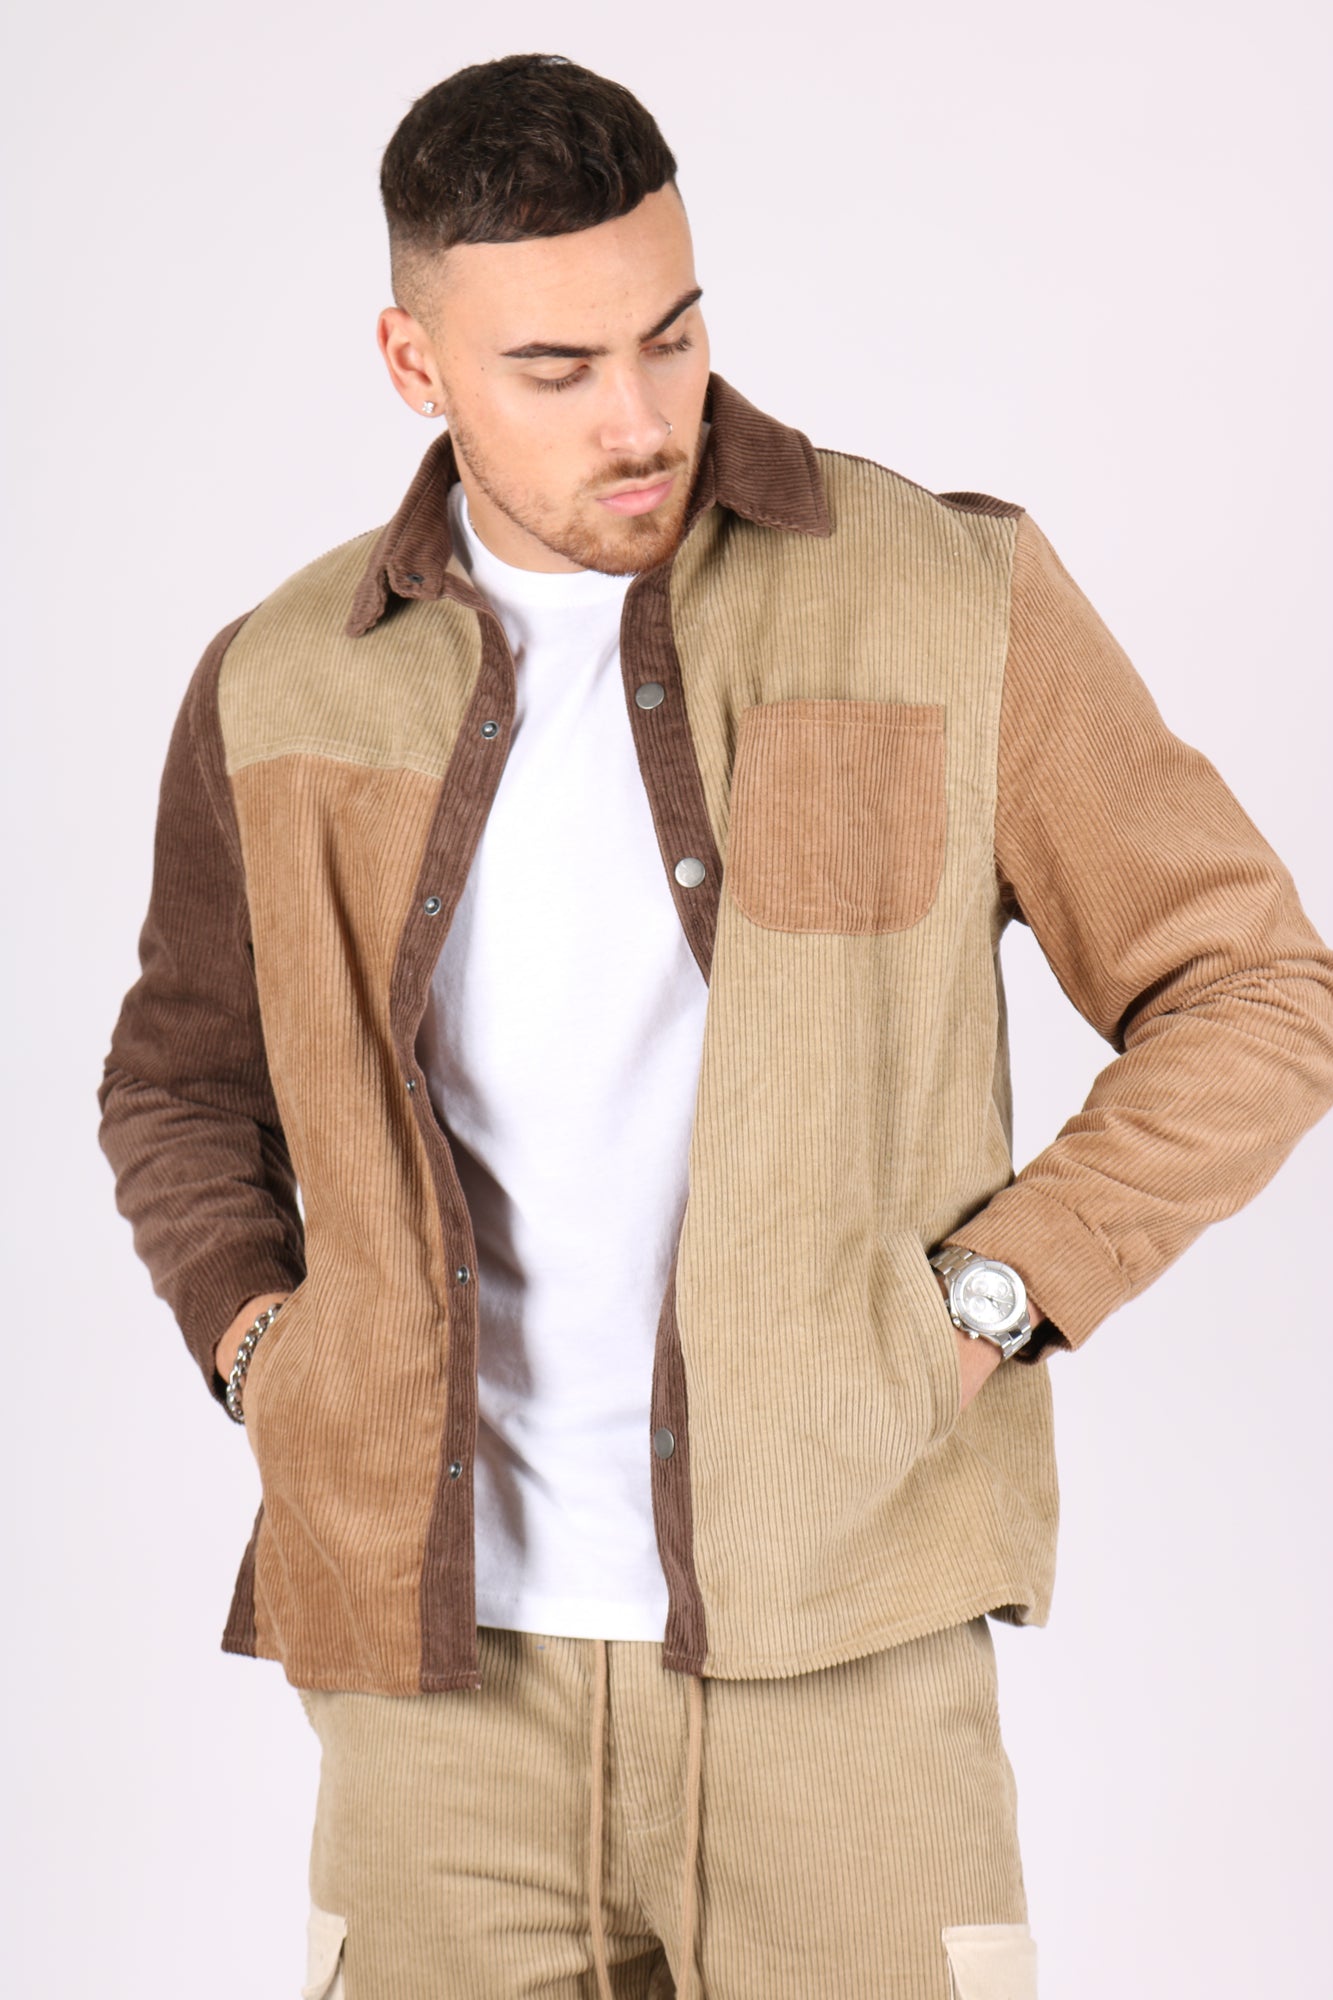 3 Tone Brown Spliced Corduroy Relaxed Shirt